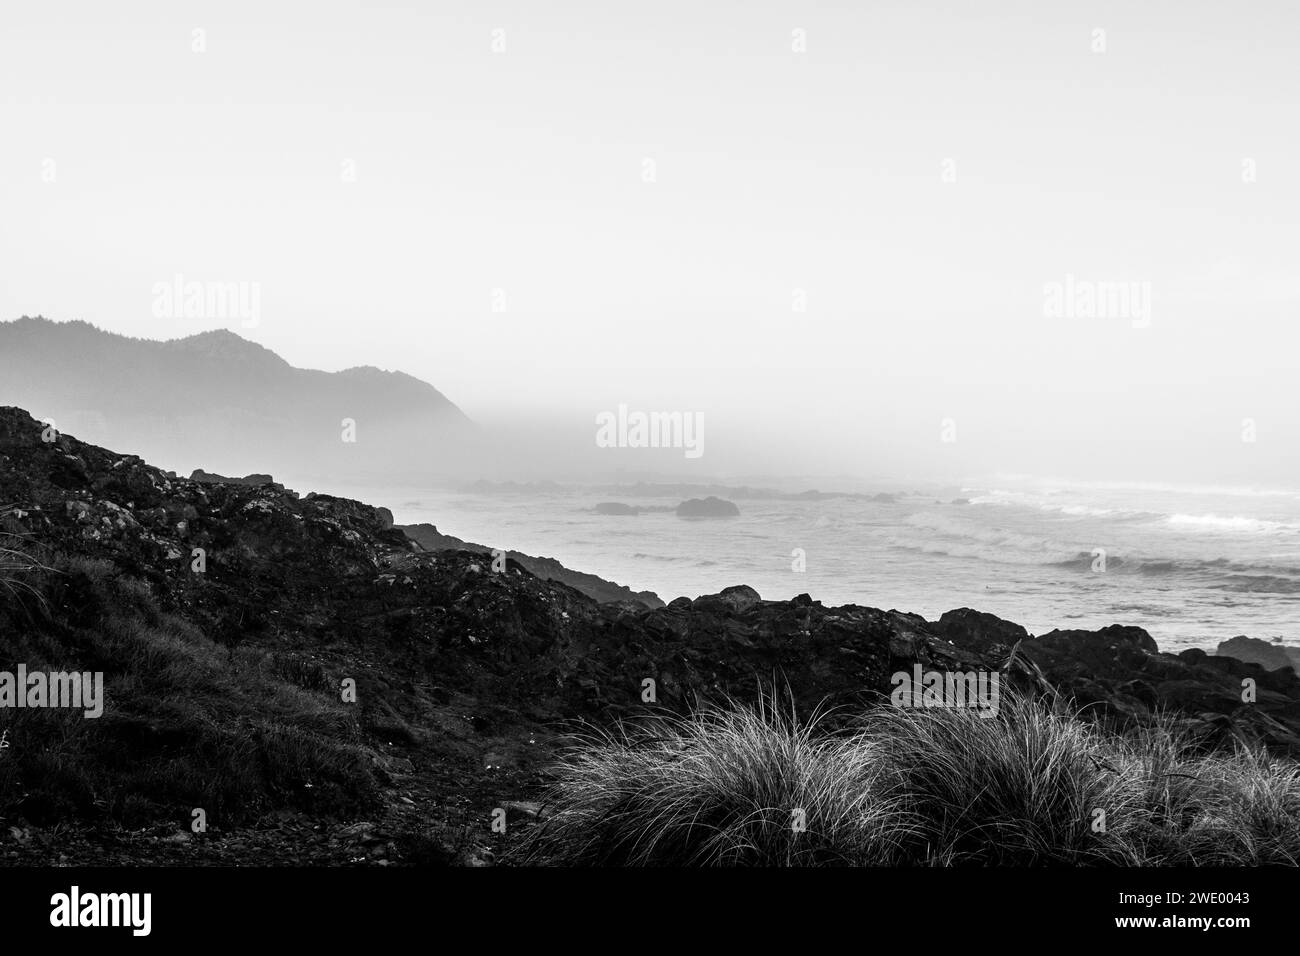 Fogy Oregon beach, with rugged rocky coastline with hardy plants.  The waves are coming in during the early morning. Stock Photo